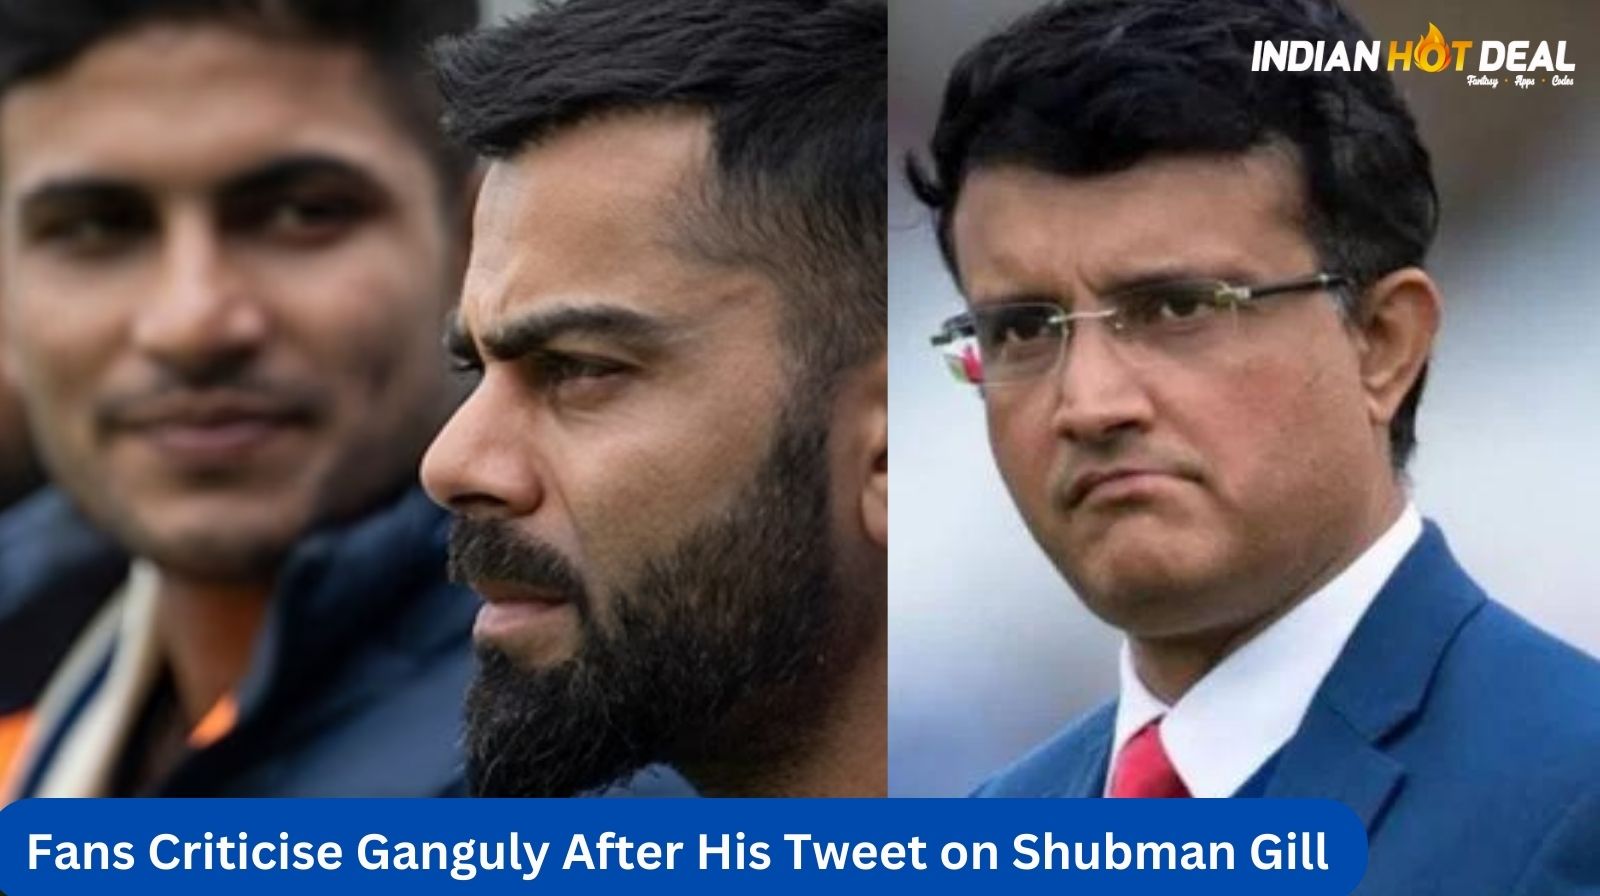 Fans Criticise Ganguly After His Tweet on Shubman Gill